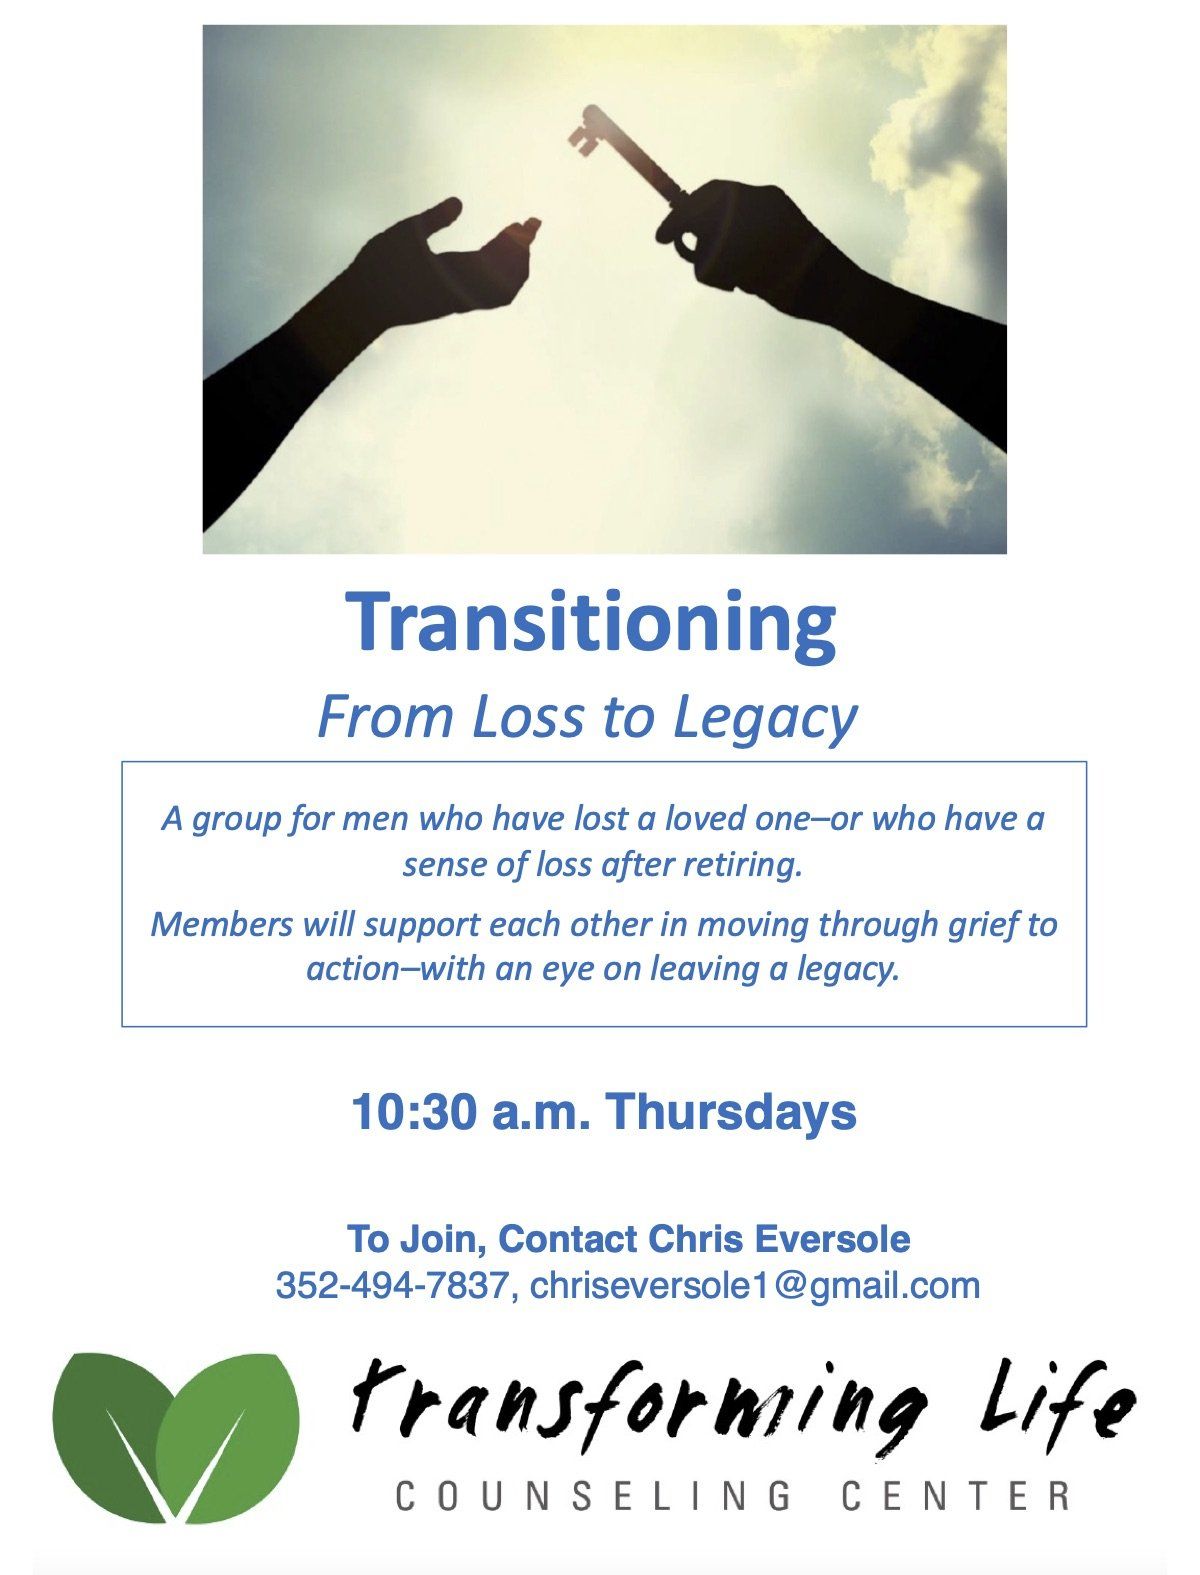 Transitioning from Loss to Legacy